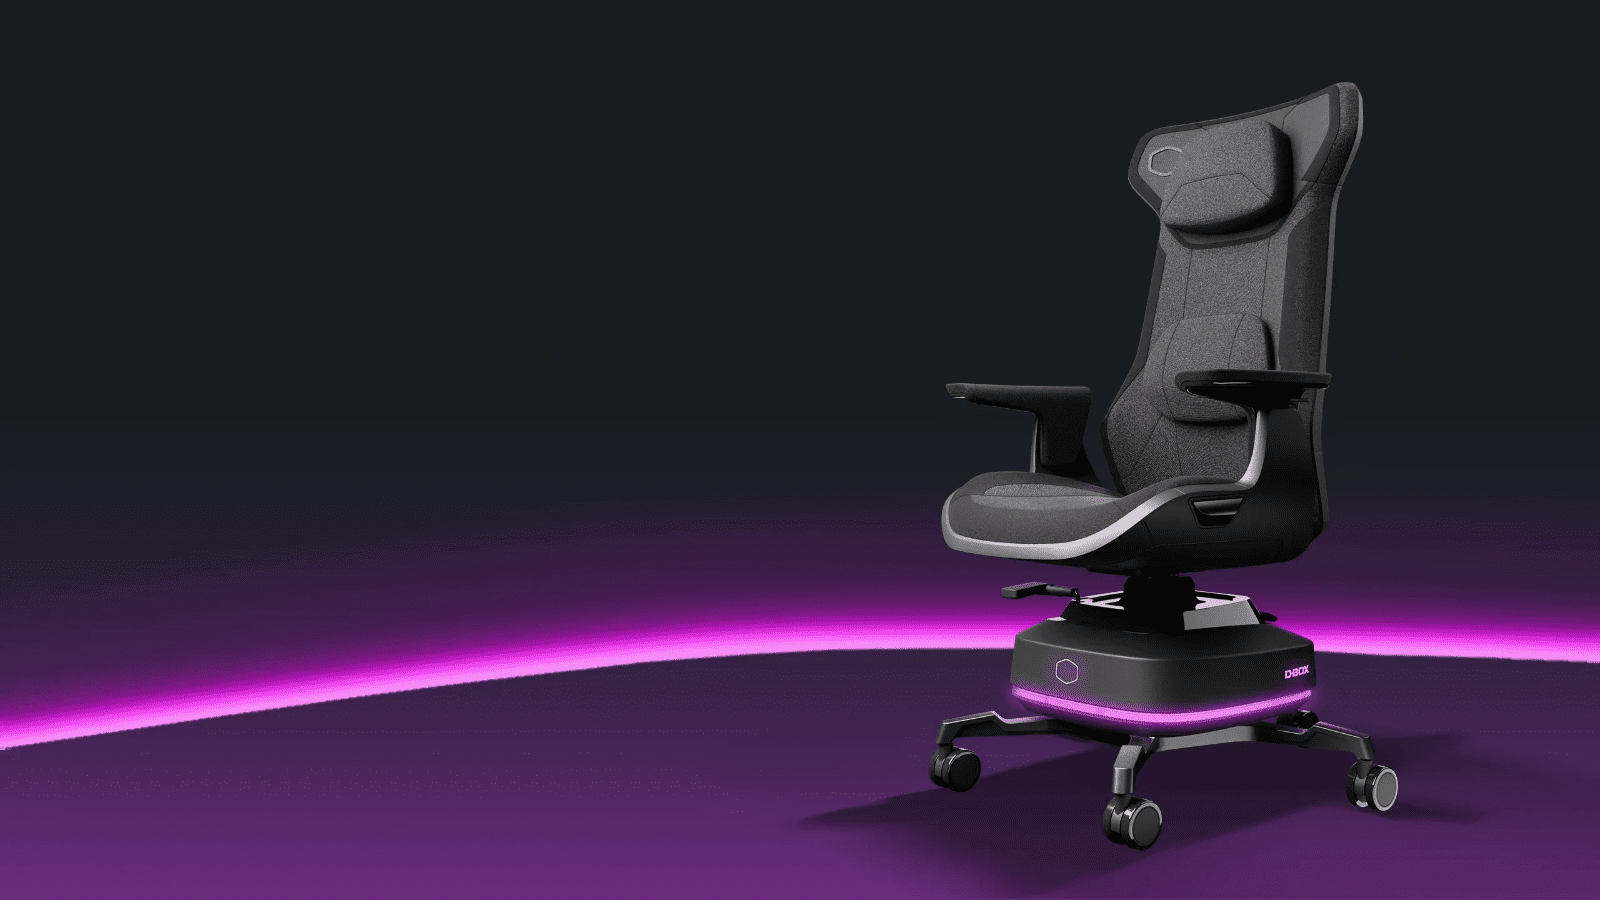 Cooler Master Motion 1 haptic feedback gaming chair: latest news, specs, where to buy